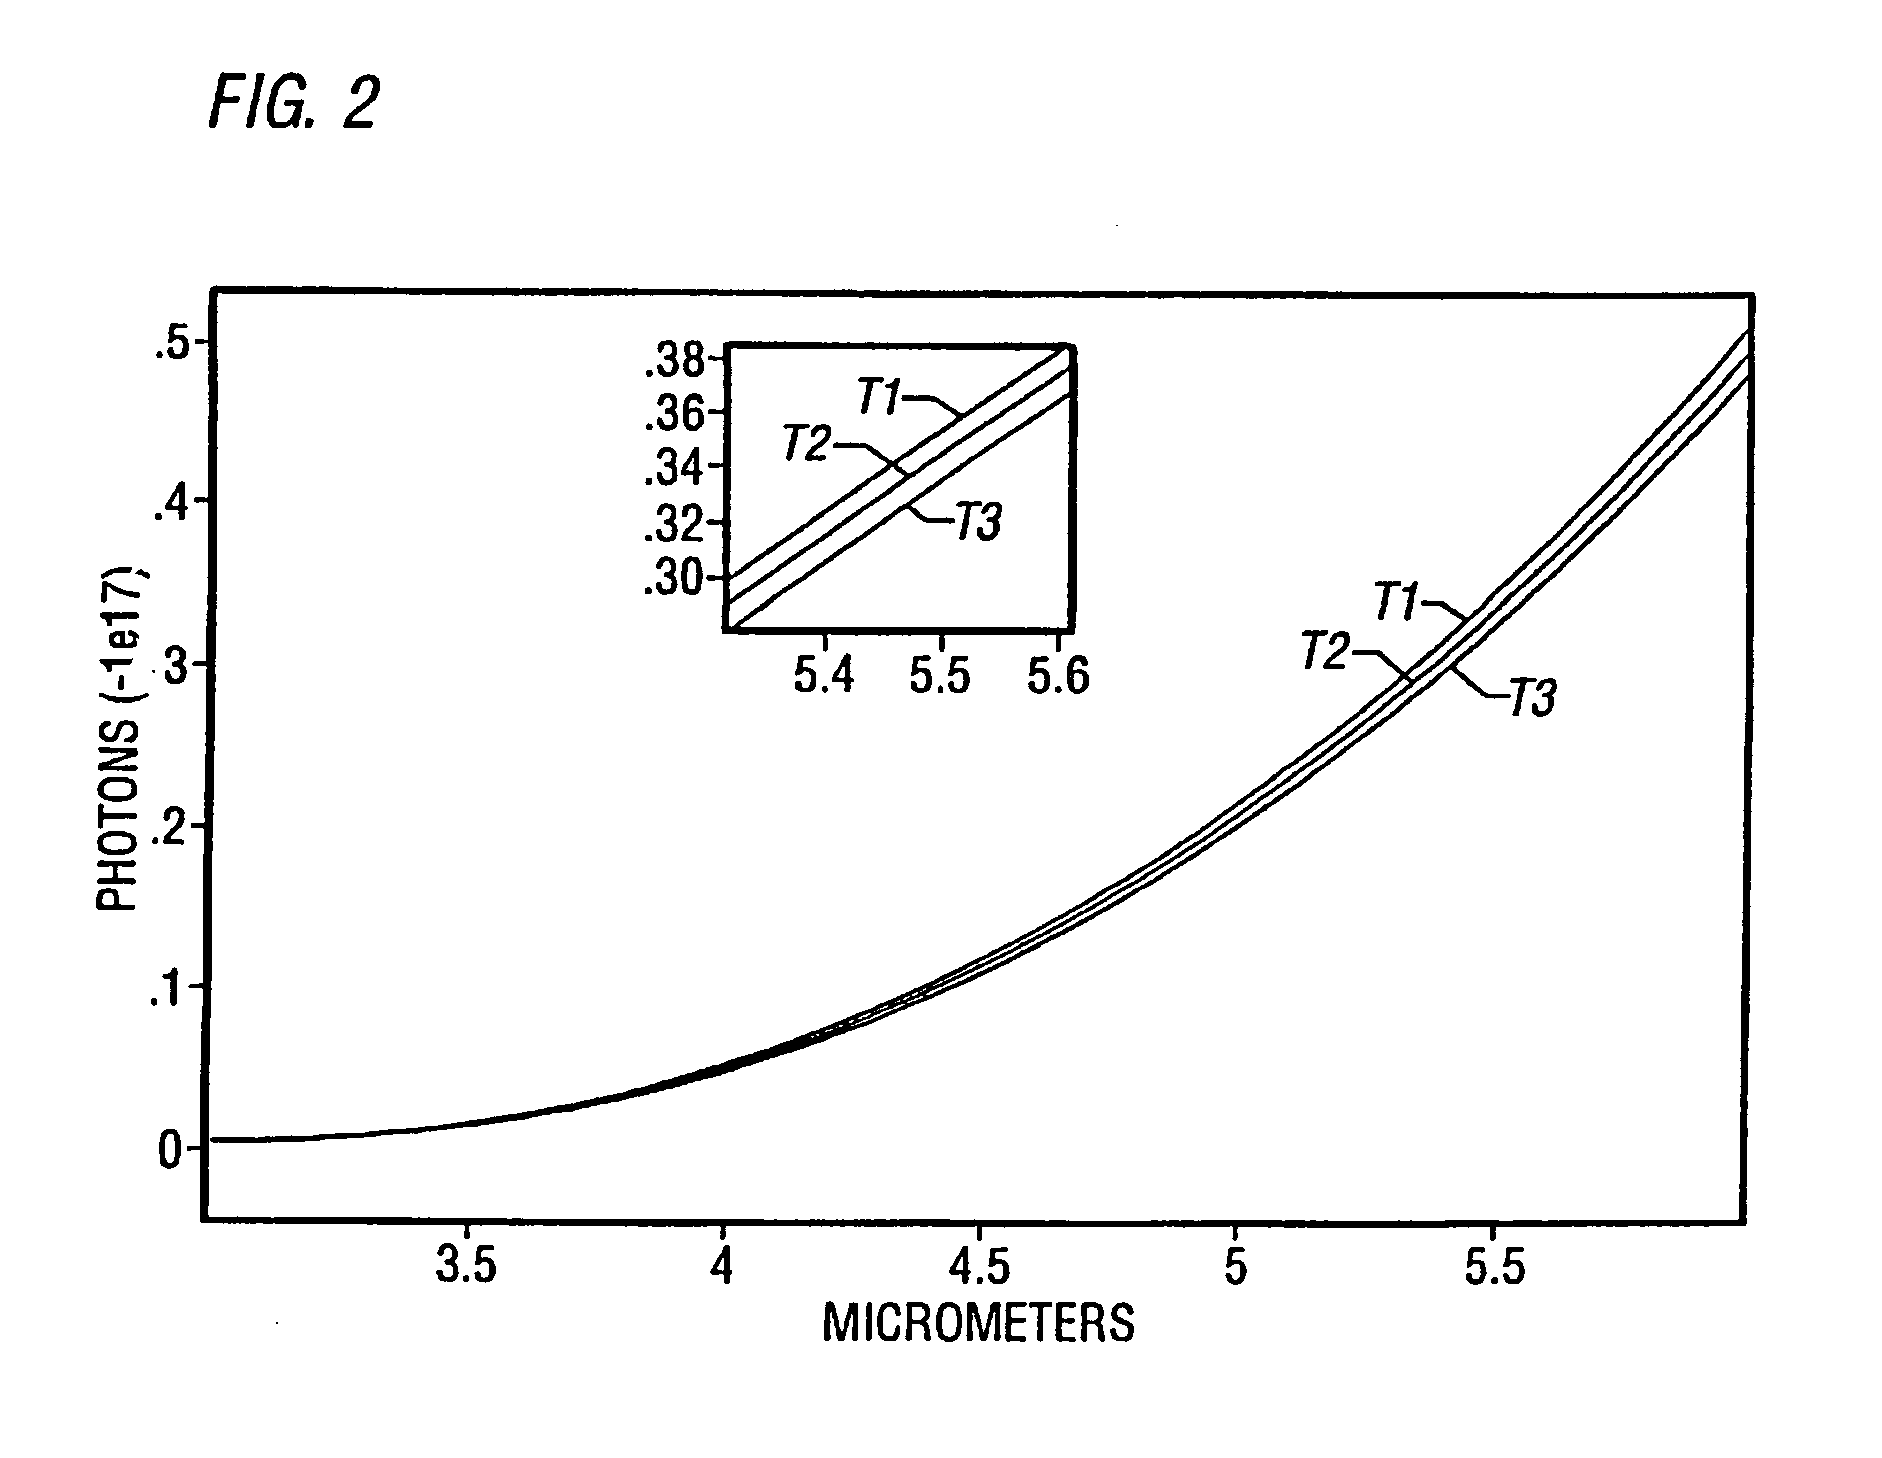 Method of detecting vulnerable atherosclerotic plaque